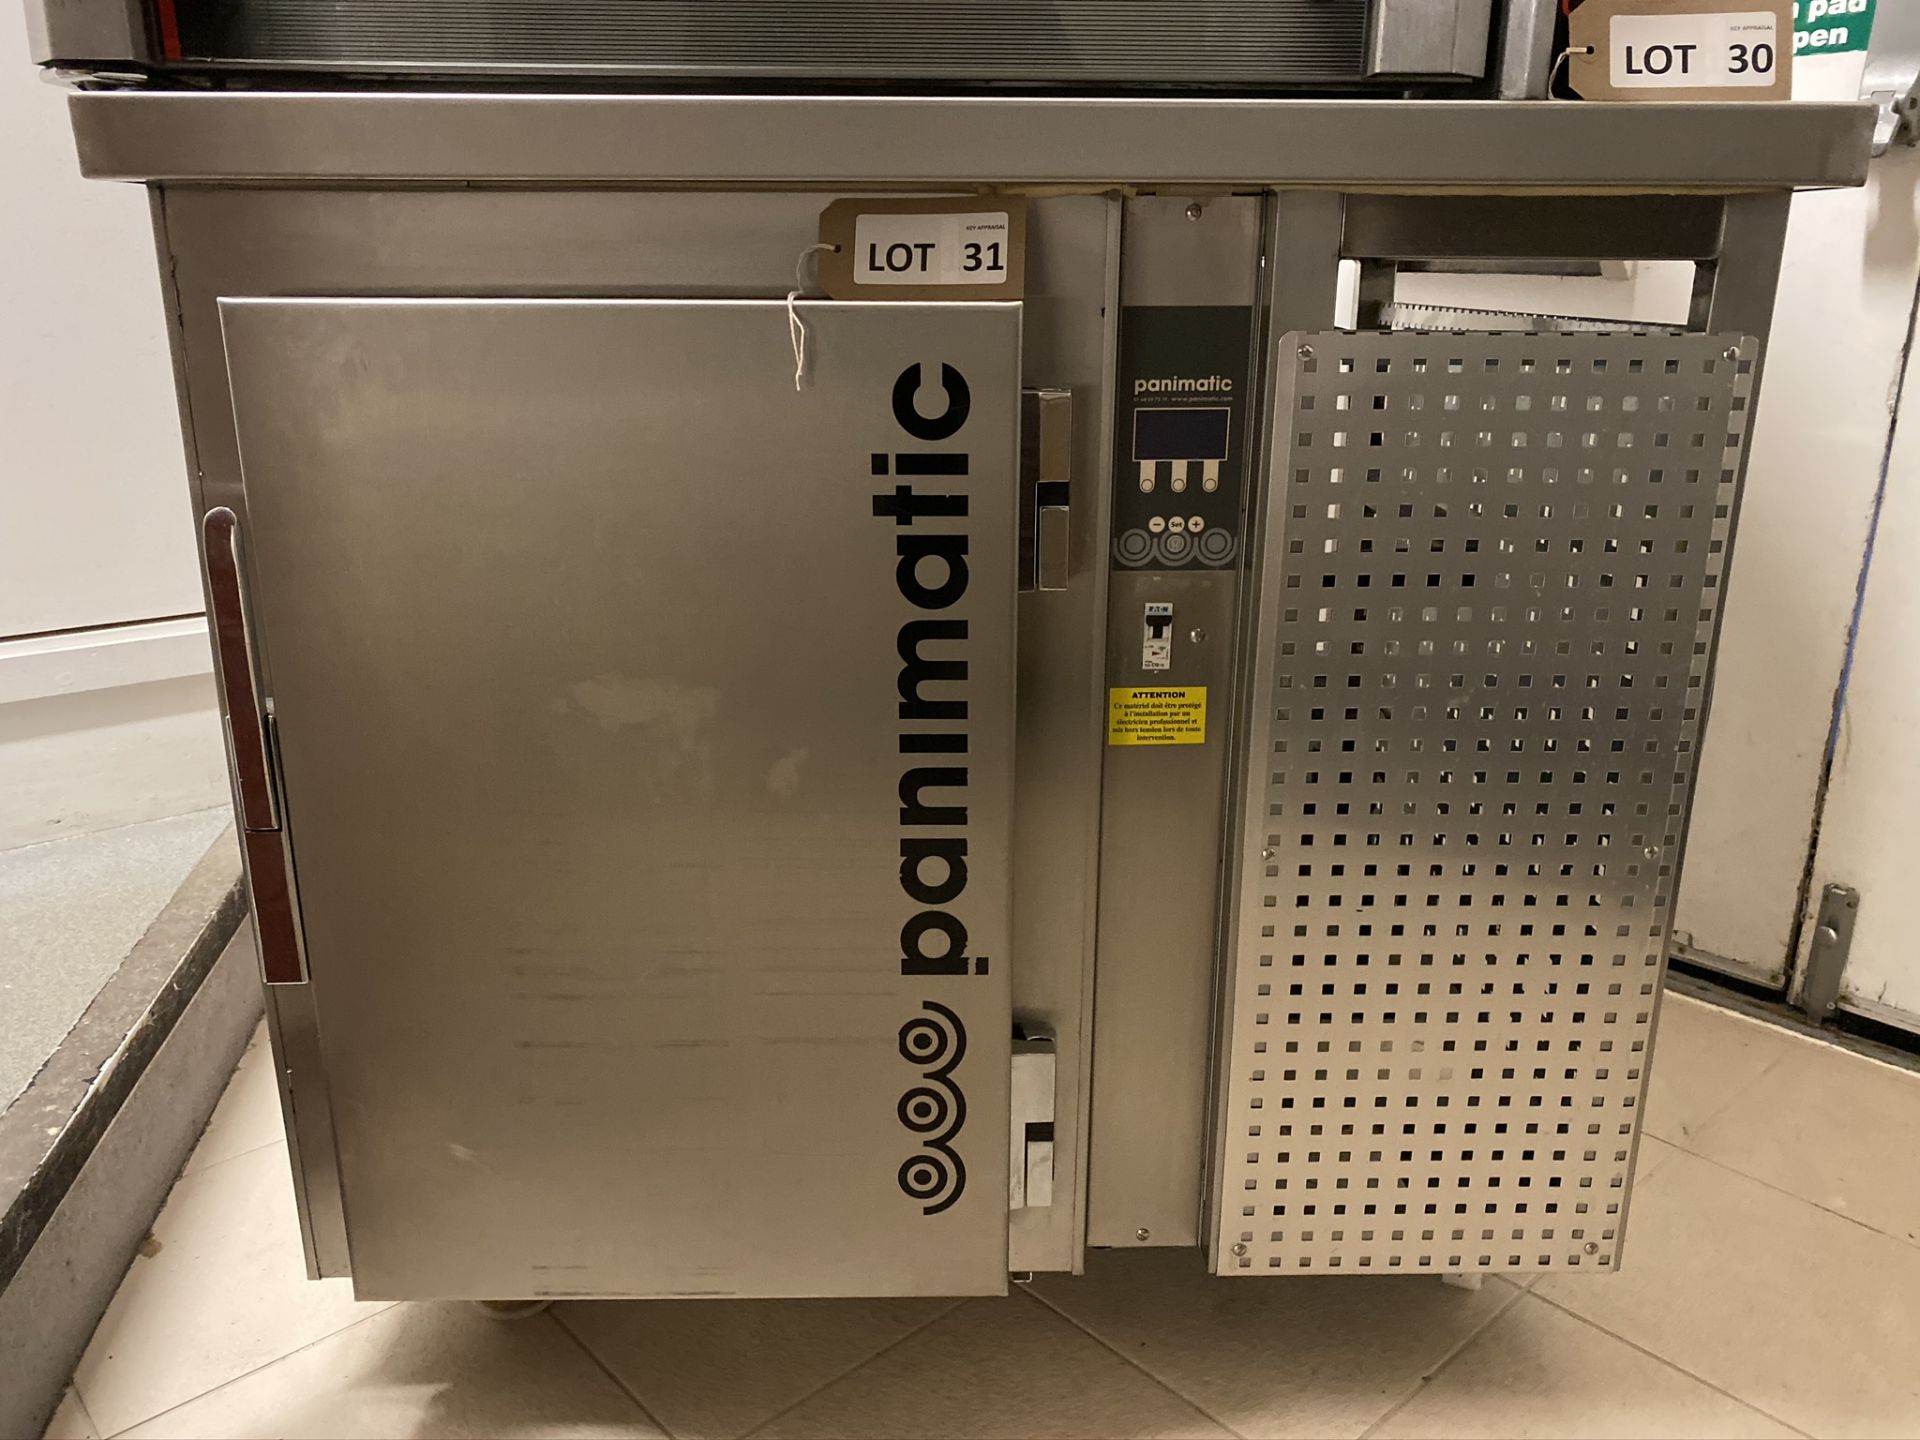 Panimatic PSF10 proving oven, Serial No: 52976 (2017)